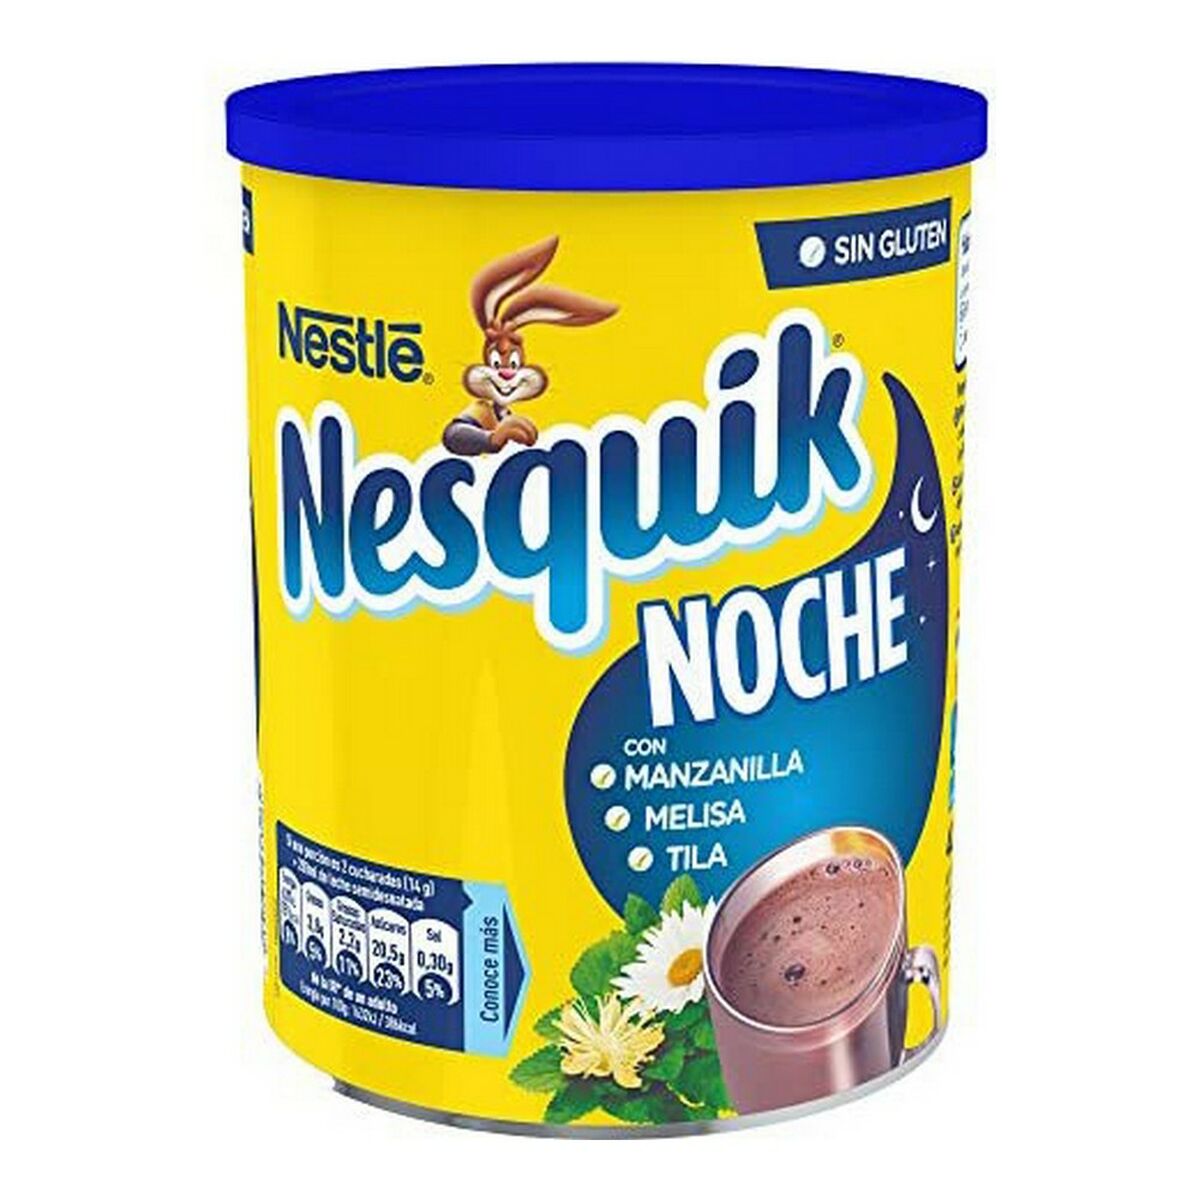 Nesquik Cacao soluble Instantáneo 50 Sobres